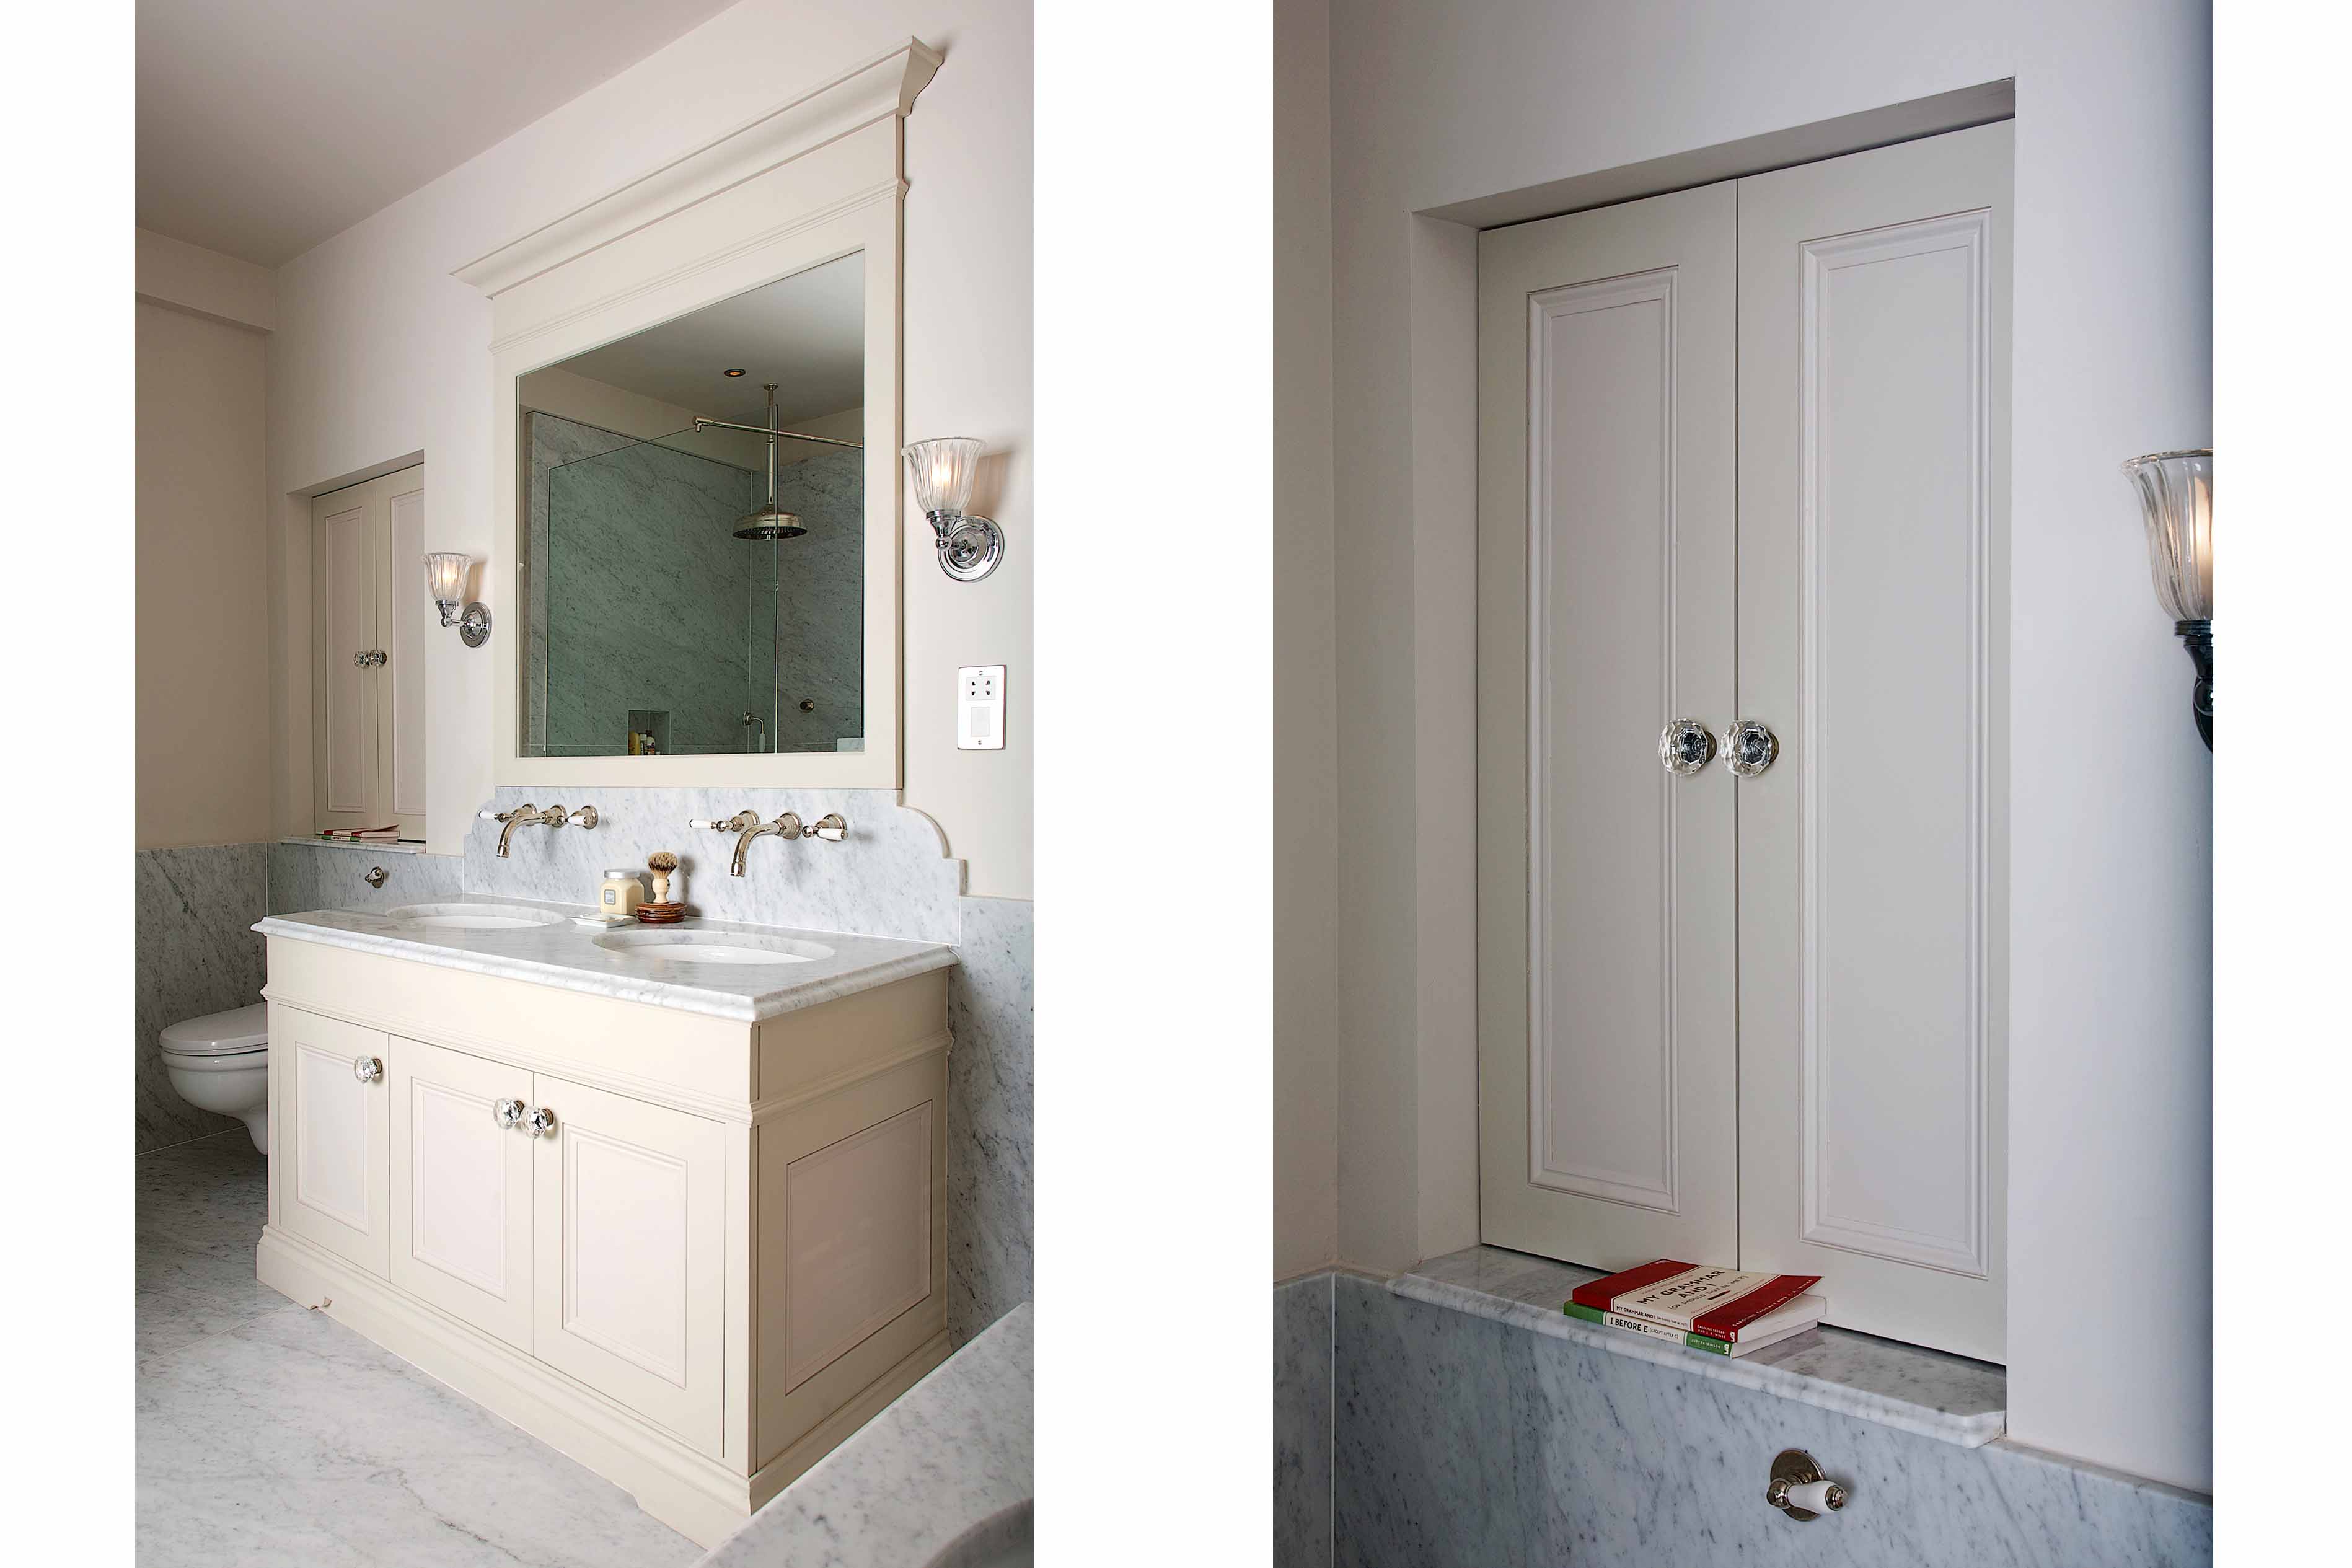 001. Bespoke bathroom cabinets villeroy boch perrin and rowe armac martin marble quartz granite tops farrow and ball mylands near Winchester Hampshire